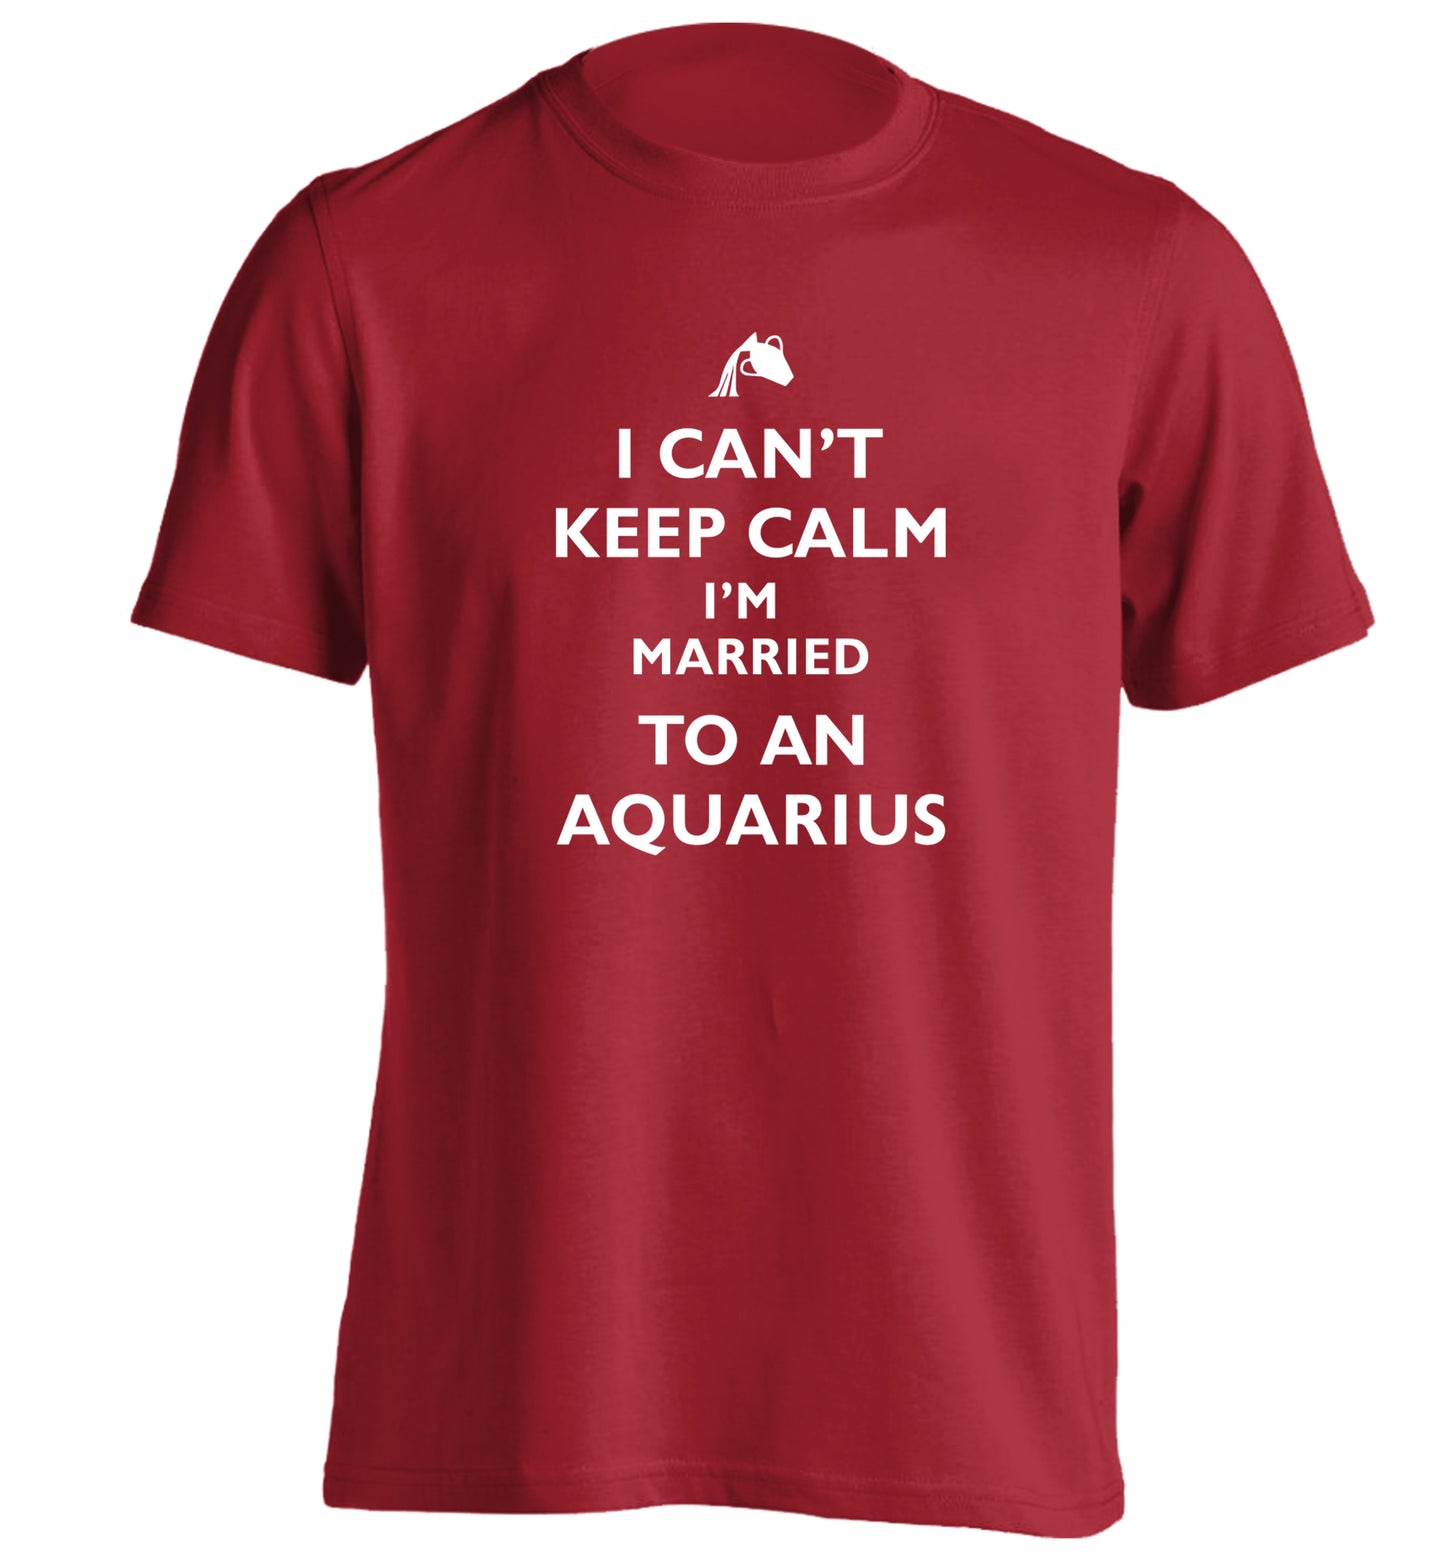 I can't keep calm I'm married to an aquarius adults unisex red Tshirt 2XL